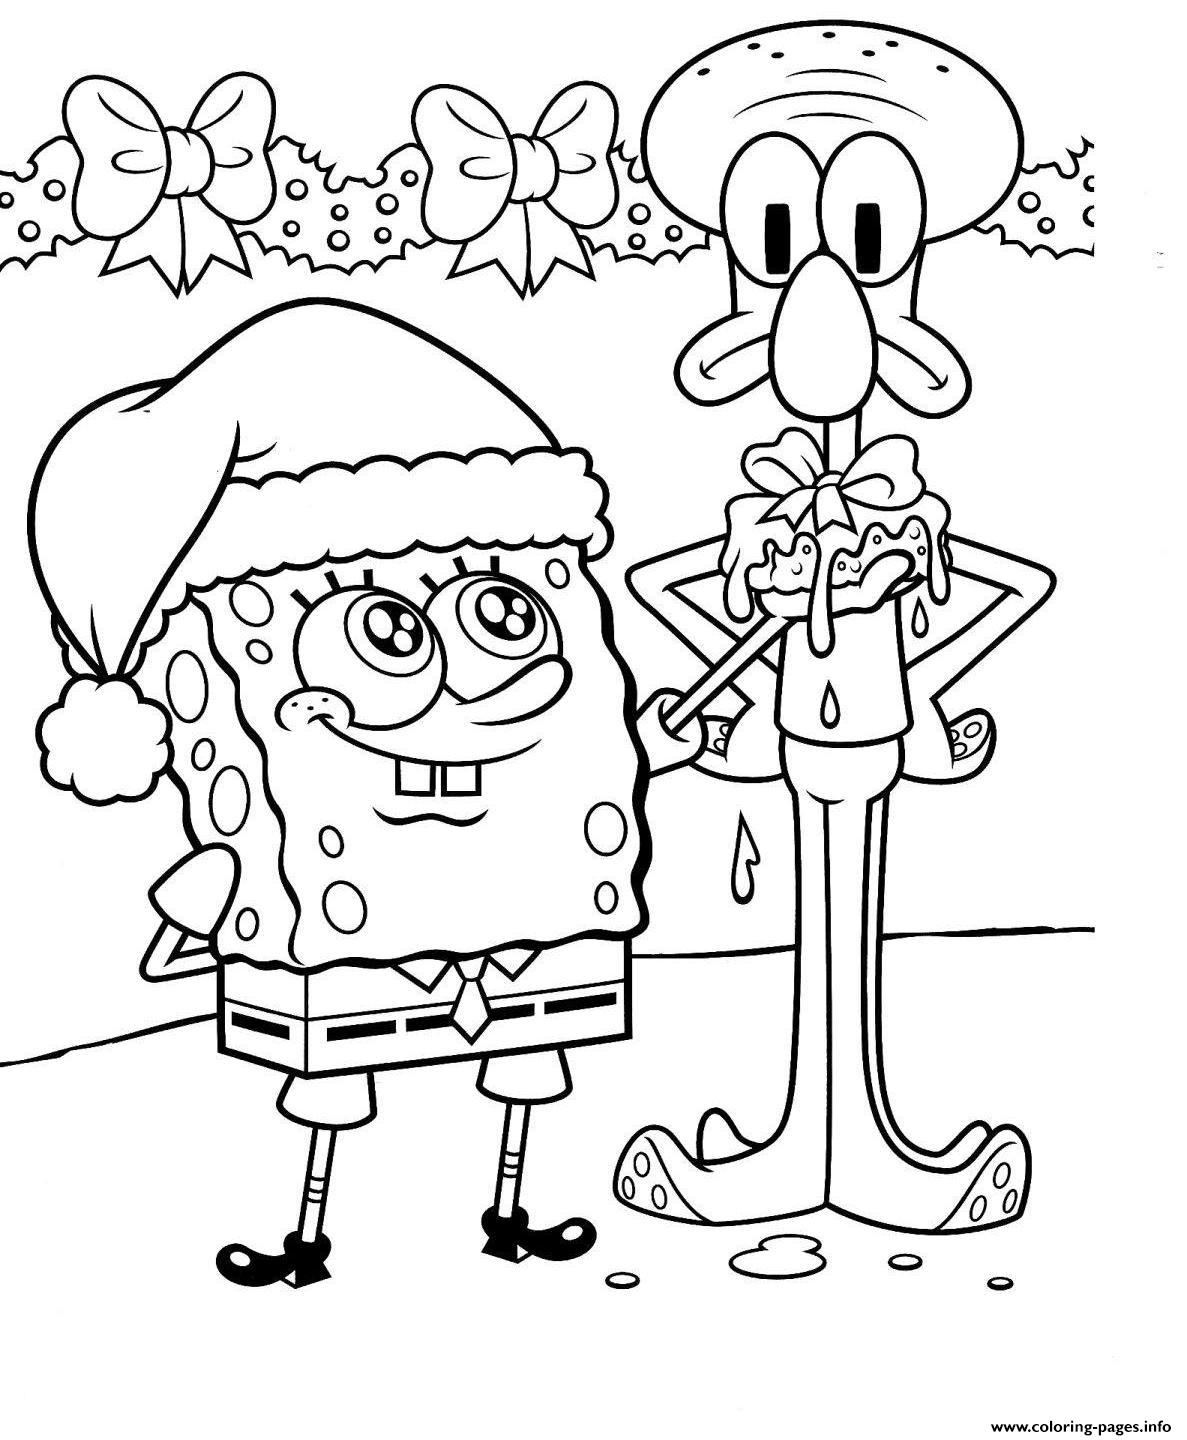 Spongebob Colouring Pages For Children Christmasb7e0 Coloring page